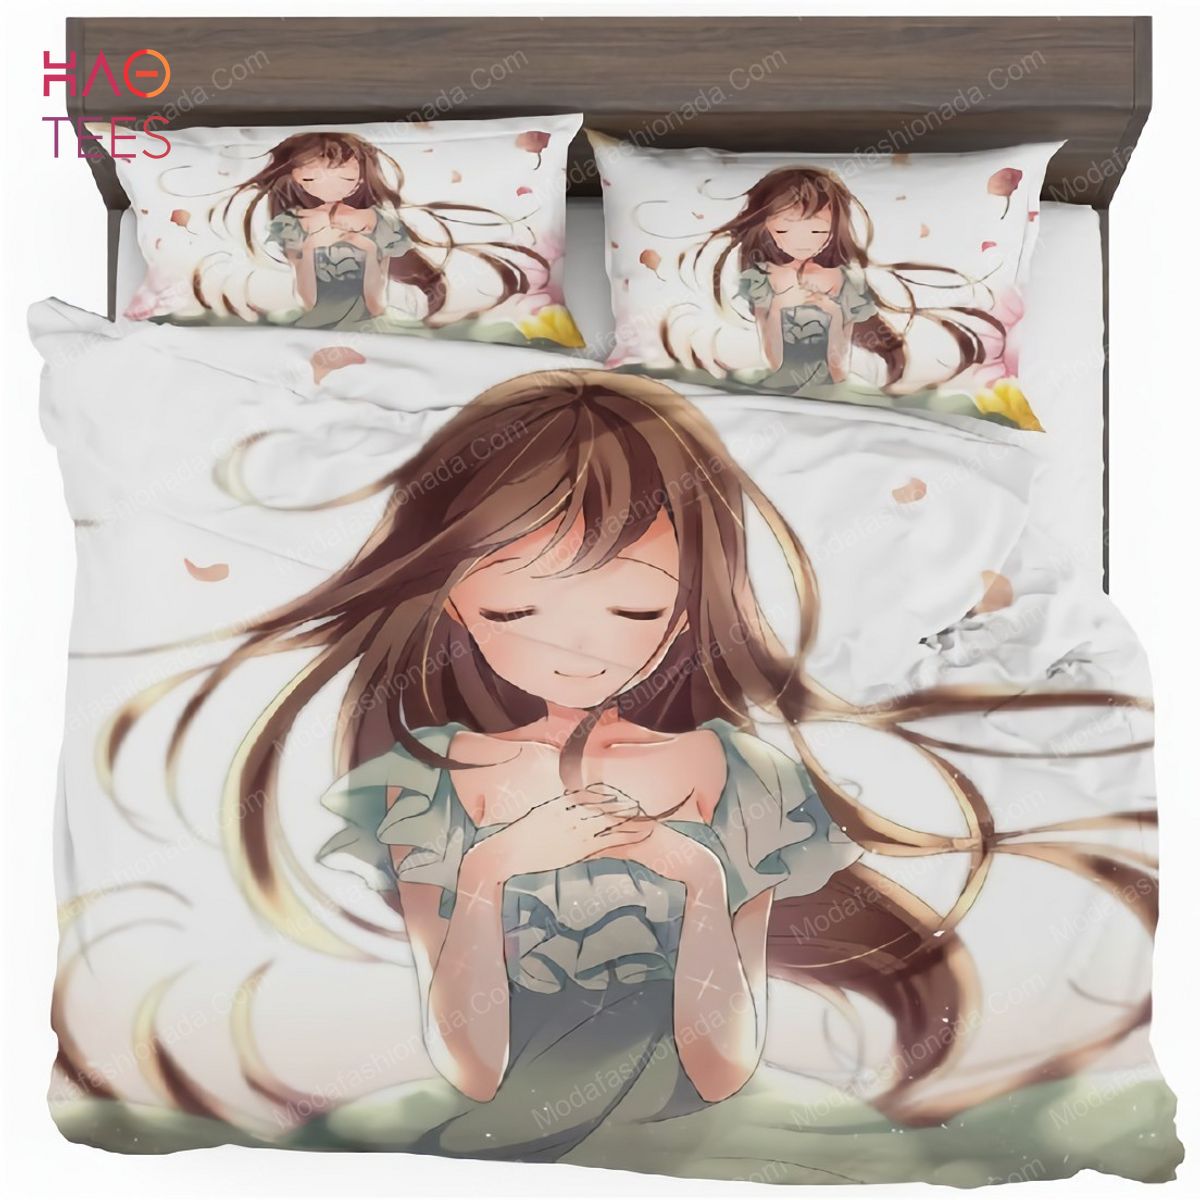 Anime NAR uto Bedding Anime Comforter Bed Duvet Cover Set Twin Full Queen  King Size Soft 2 Pillow Cases for Bedroom Decoration - Walmart.com